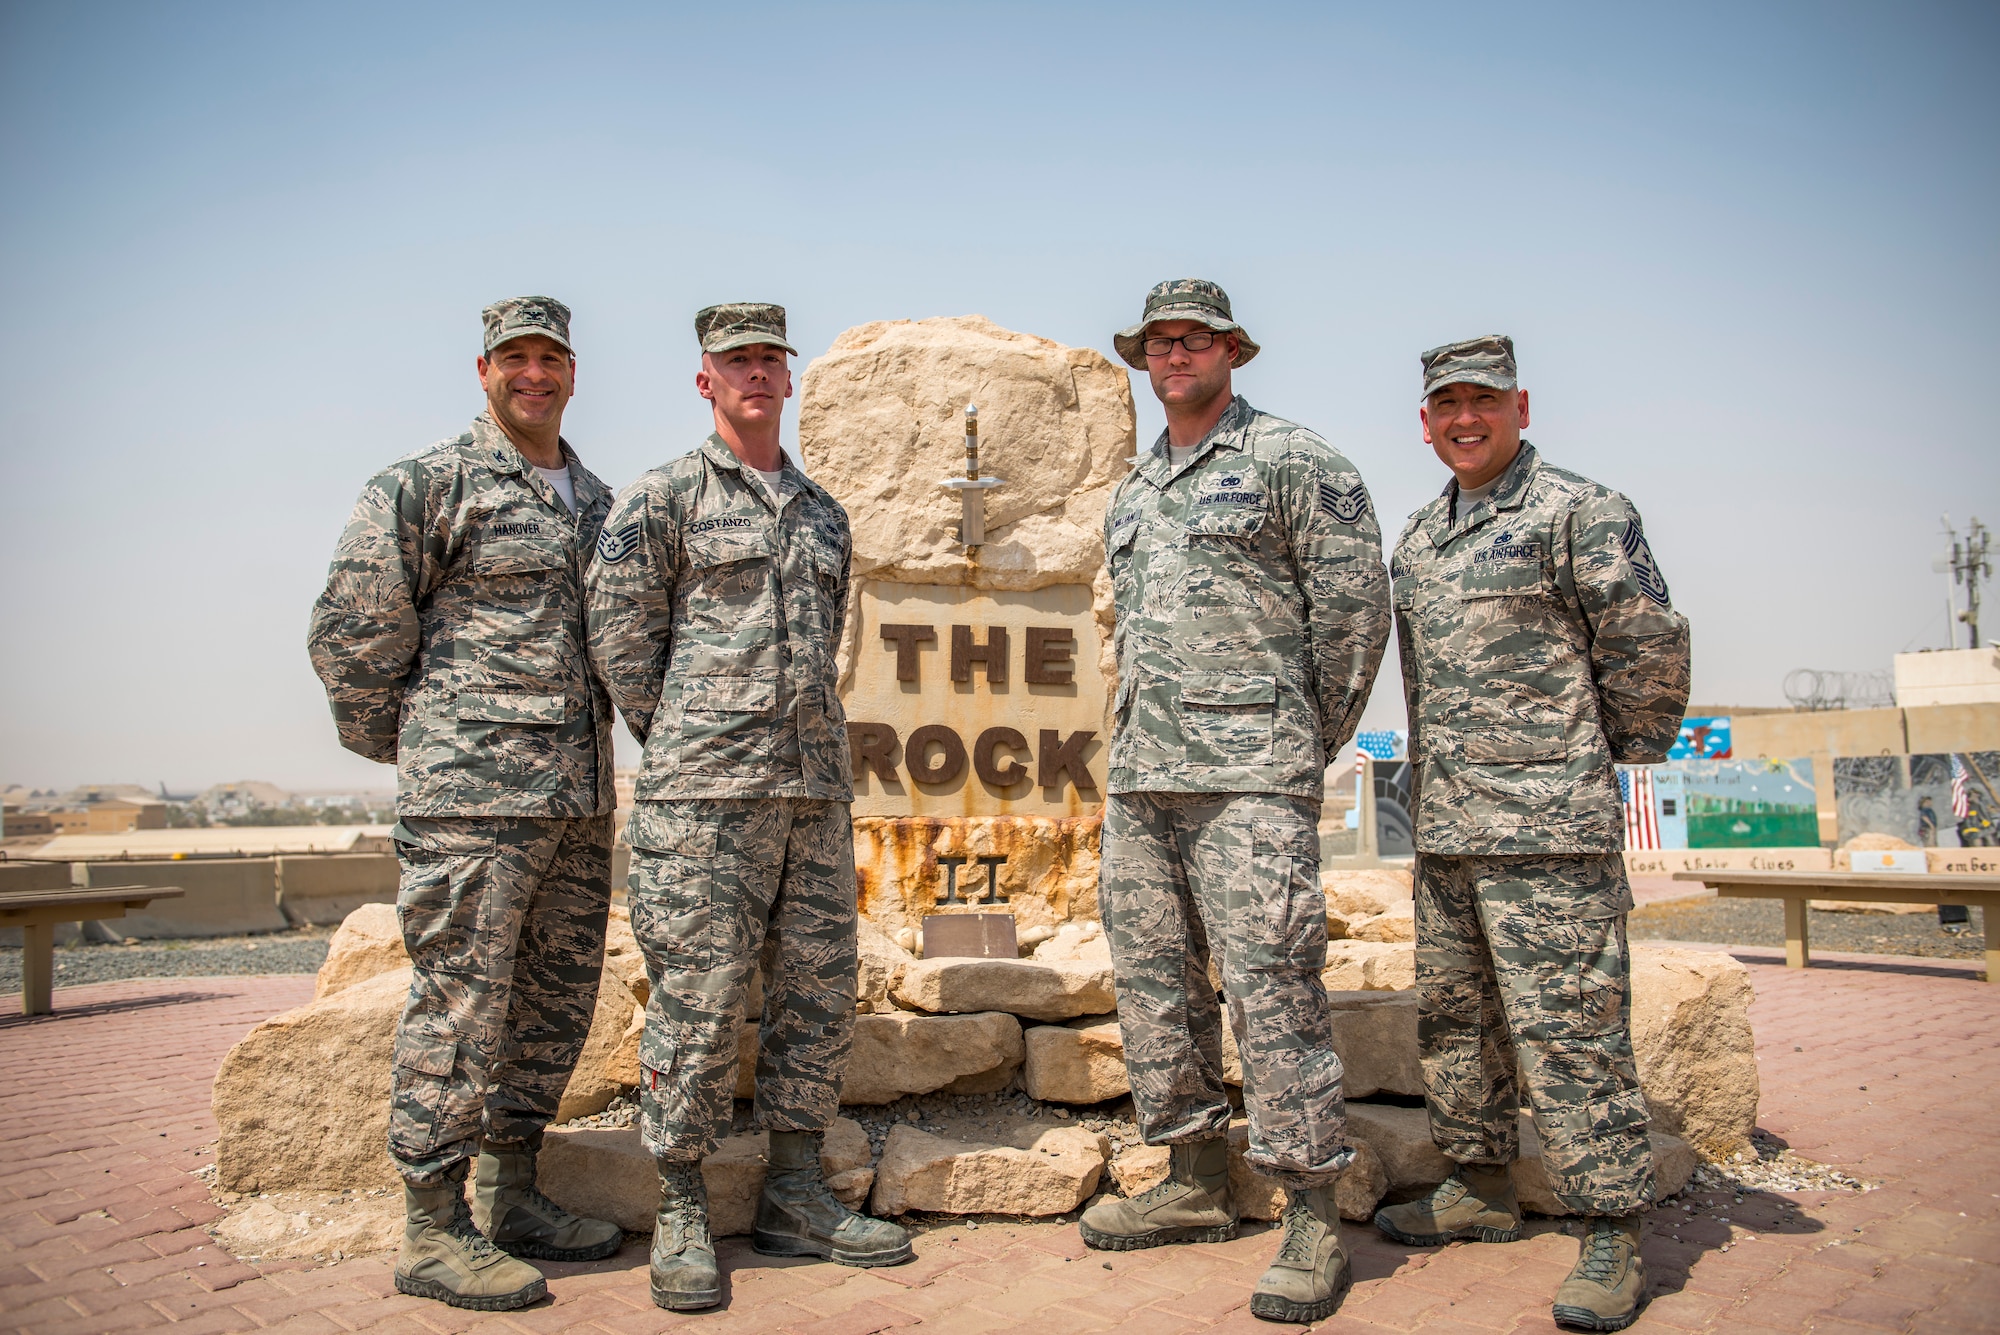 U.S. Air Force Staff Sgts. Justin Costanzo and Jarrod McMillian, 386th Expeditionary Maintenance Squadron aircraft maintenance technicians, pose in front of The Rock after unveiling the new sword to the 386th Air Expeditionary Wing with the commander, Col. Jason Hanover, and the command chief, Jose Barraza, Aug. 19, 2014 at an undisclosed location in Southwest Asia. Costanzo and McMillian spent over 140 man-hours designing and building the sword. Costanzo deployed from Shaw Air Force Base, S.C. and McMillian deployed from Davis-Monthan AFB, Ariz. in support of Operation Enduring Freedom. (U.S. Air Force photo by Staff Sgt. Jeremy Bowcock)